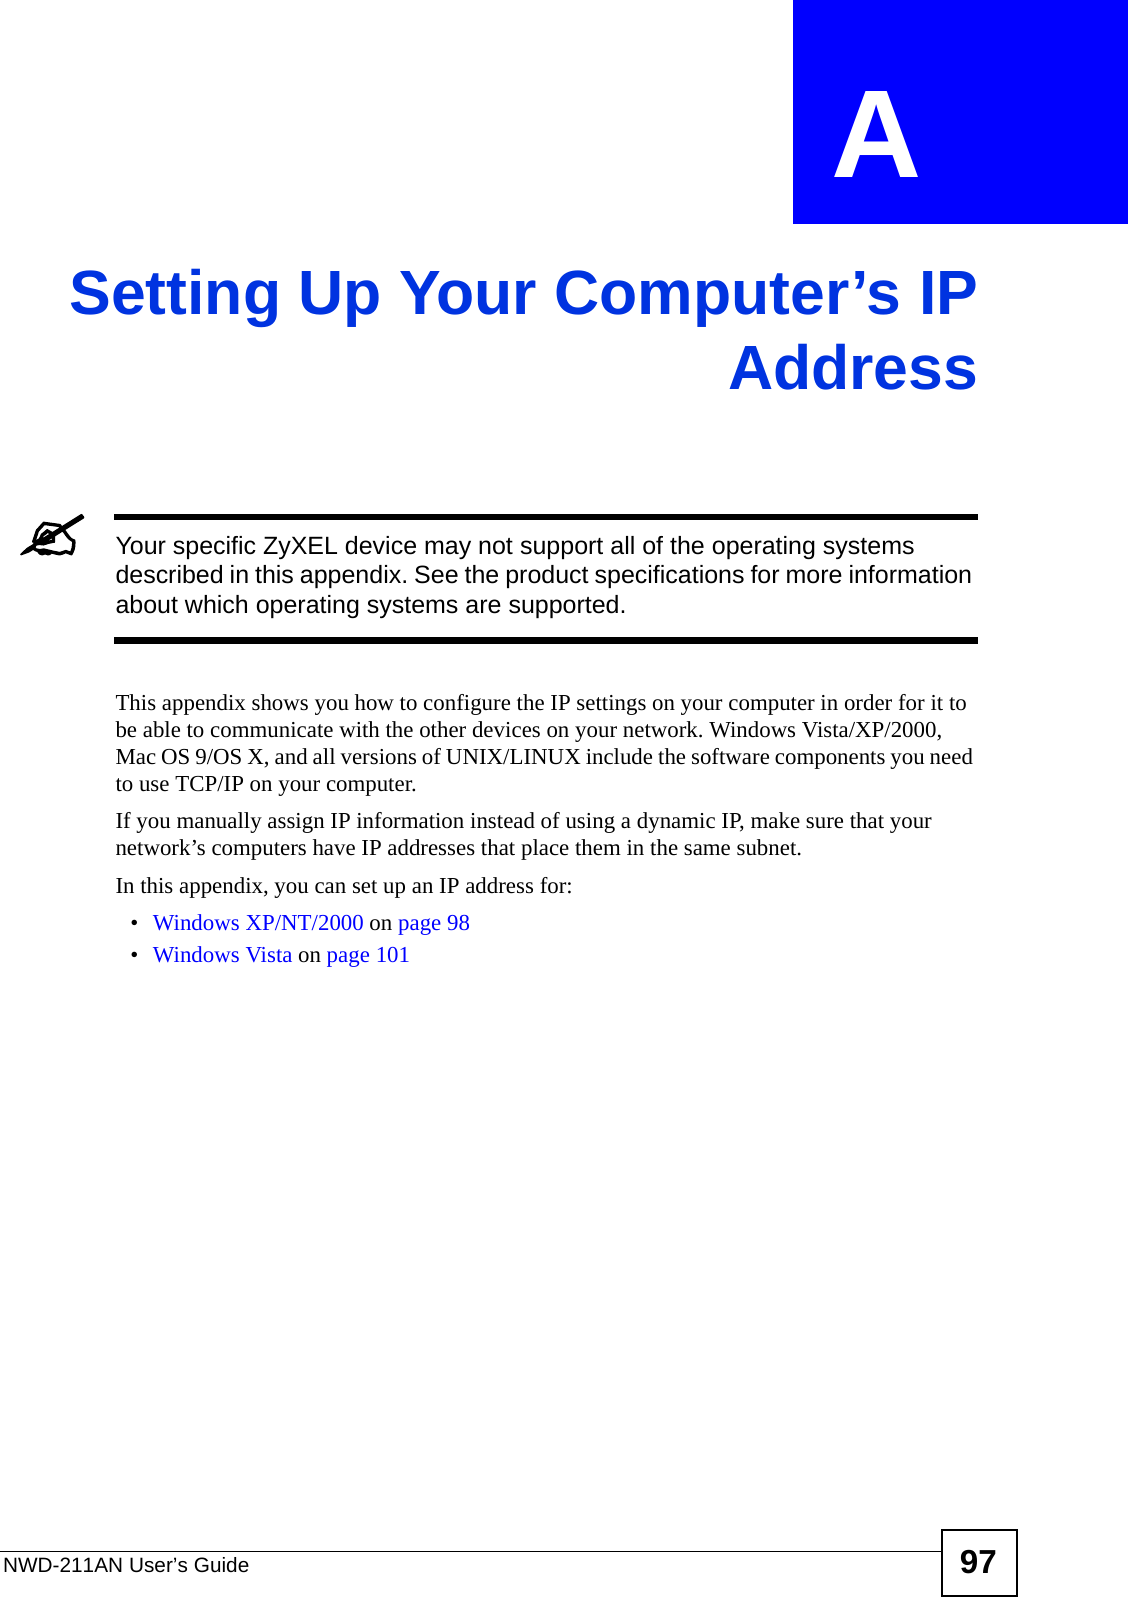 NWD-211AN User’s Guide 97APPENDIX  A Setting Up Your Computer’s IPAddress&quot;Your specific ZyXEL device may not support all of the operating systems described in this appendix. See the product specifications for more information about which operating systems are supported.This appendix shows you how to configure the IP settings on your computer in order for it to be able to communicate with the other devices on your network. Windows Vista/XP/2000, Mac OS 9/OS X, and all versions of UNIX/LINUX include the software components you need to use TCP/IP on your computer. If you manually assign IP information instead of using a dynamic IP, make sure that your network’s computers have IP addresses that place them in the same subnet.In this appendix, you can set up an IP address for:•Windows XP/NT/2000 on page 98•Windows Vista on page 101